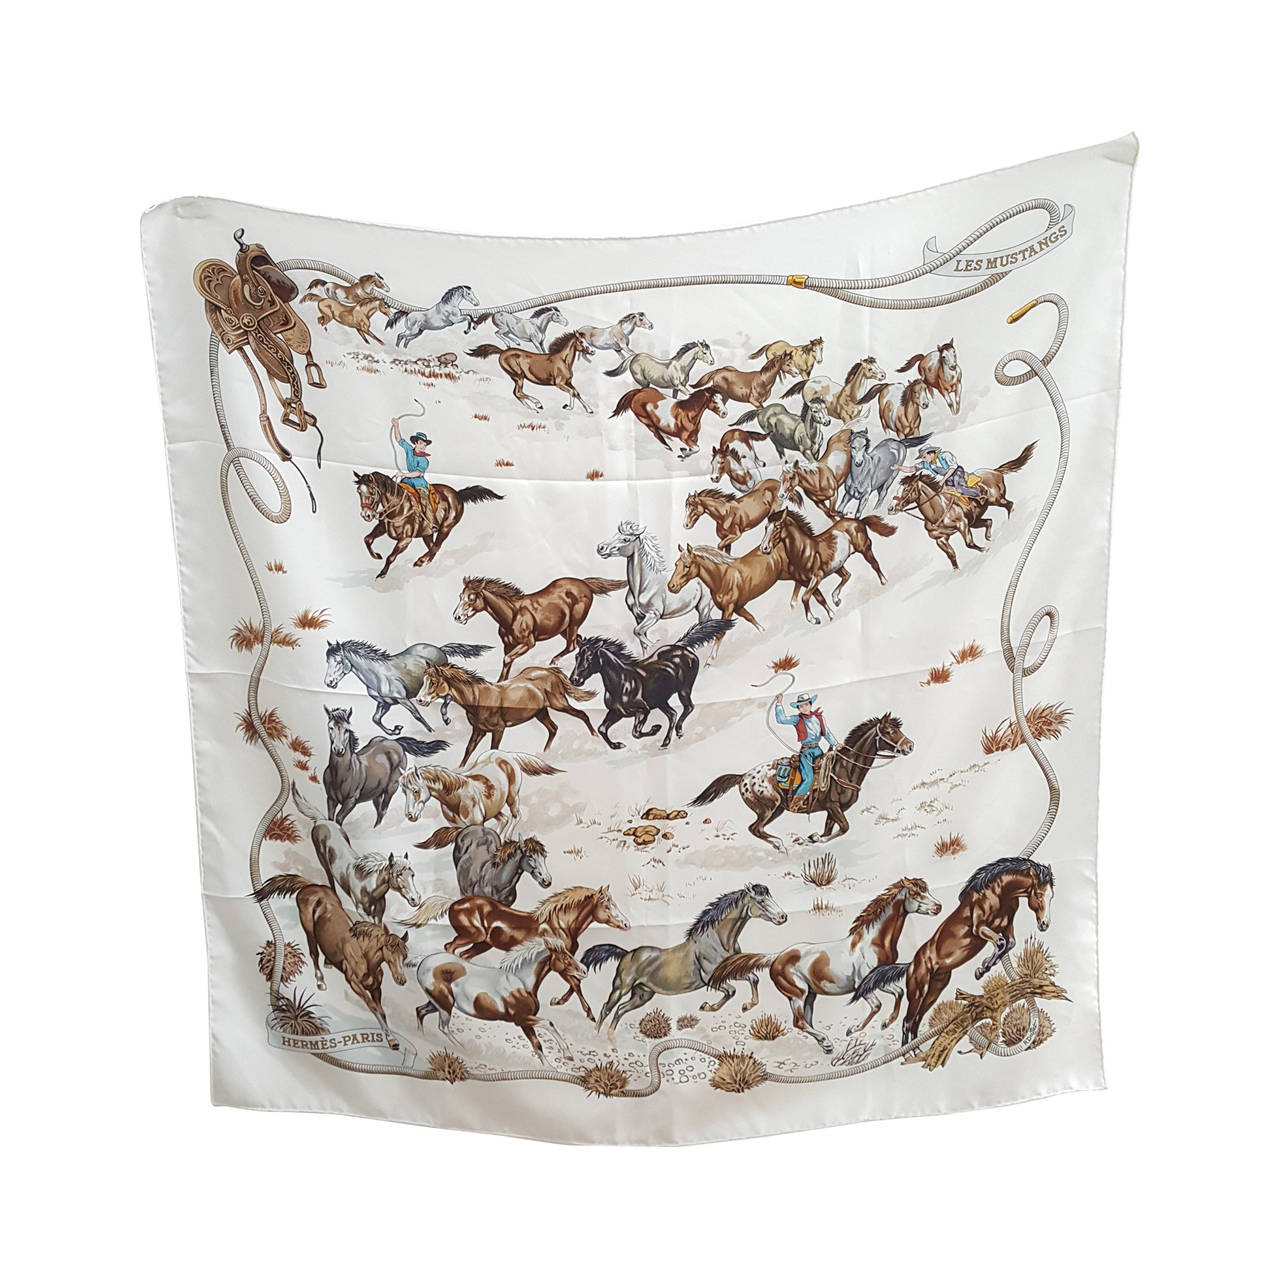 Hermes"Les Mustangs" Silk Twill Scarf By Robert Dallet from 1993/1994